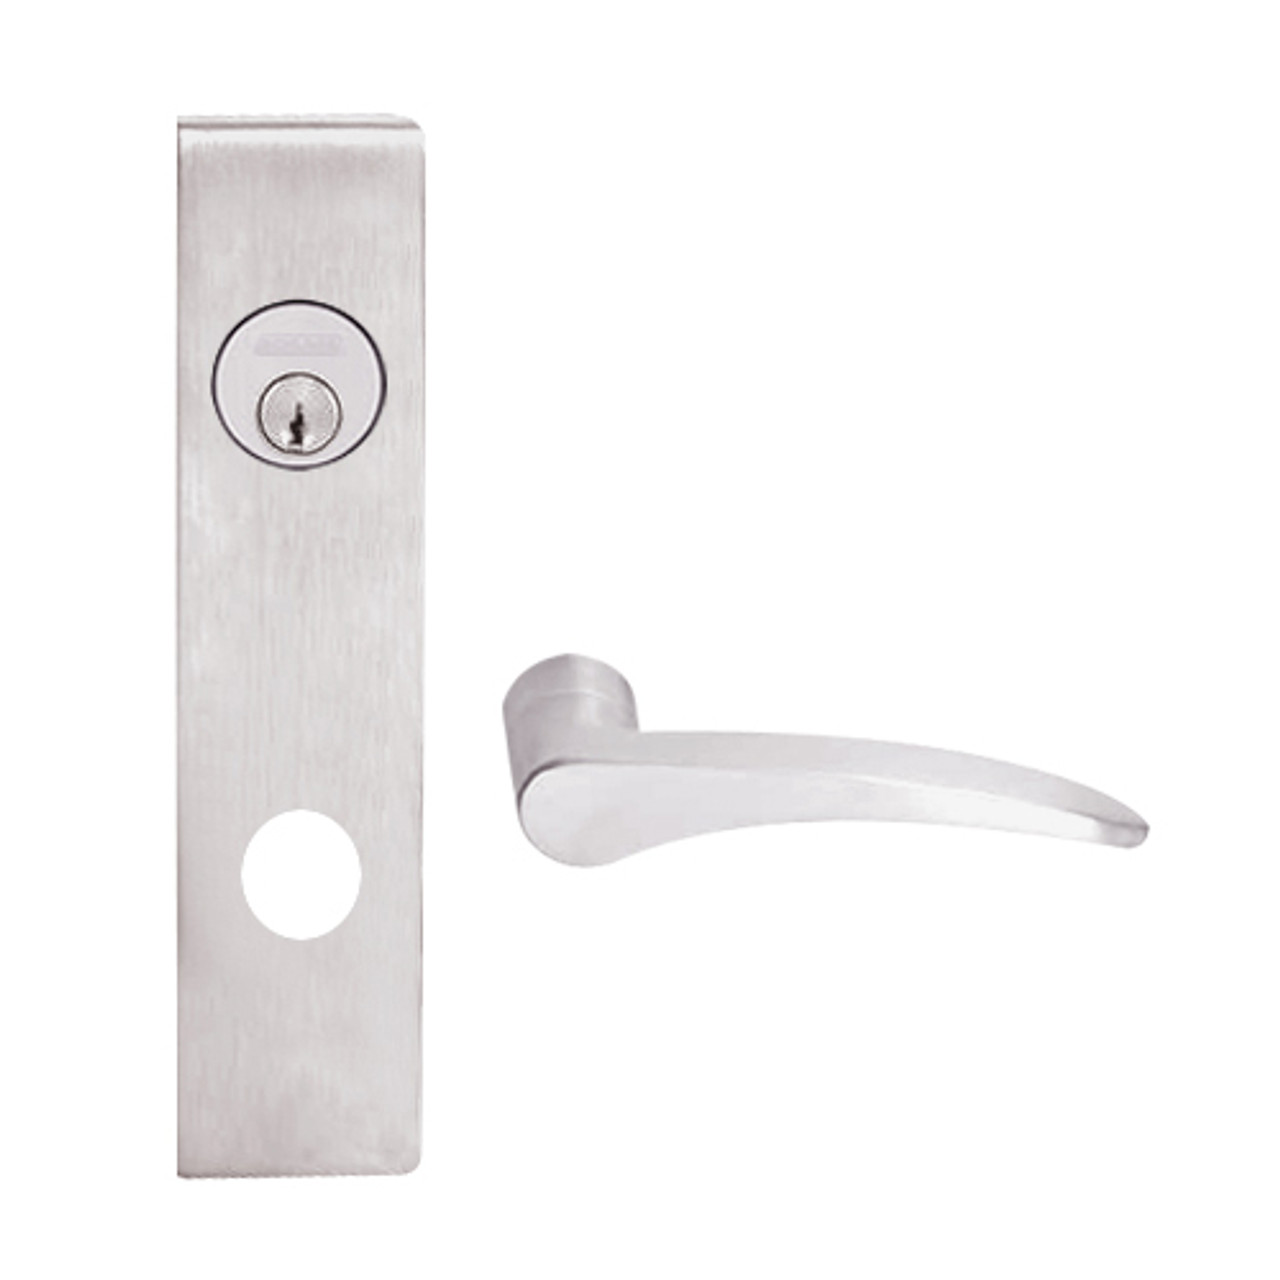 L9026P-12L-629-RH Schlage L Series Exit Lock with Cylinder Commercial Mortise Lock with 12 Cast Lever Design in Bright Stainless Steel